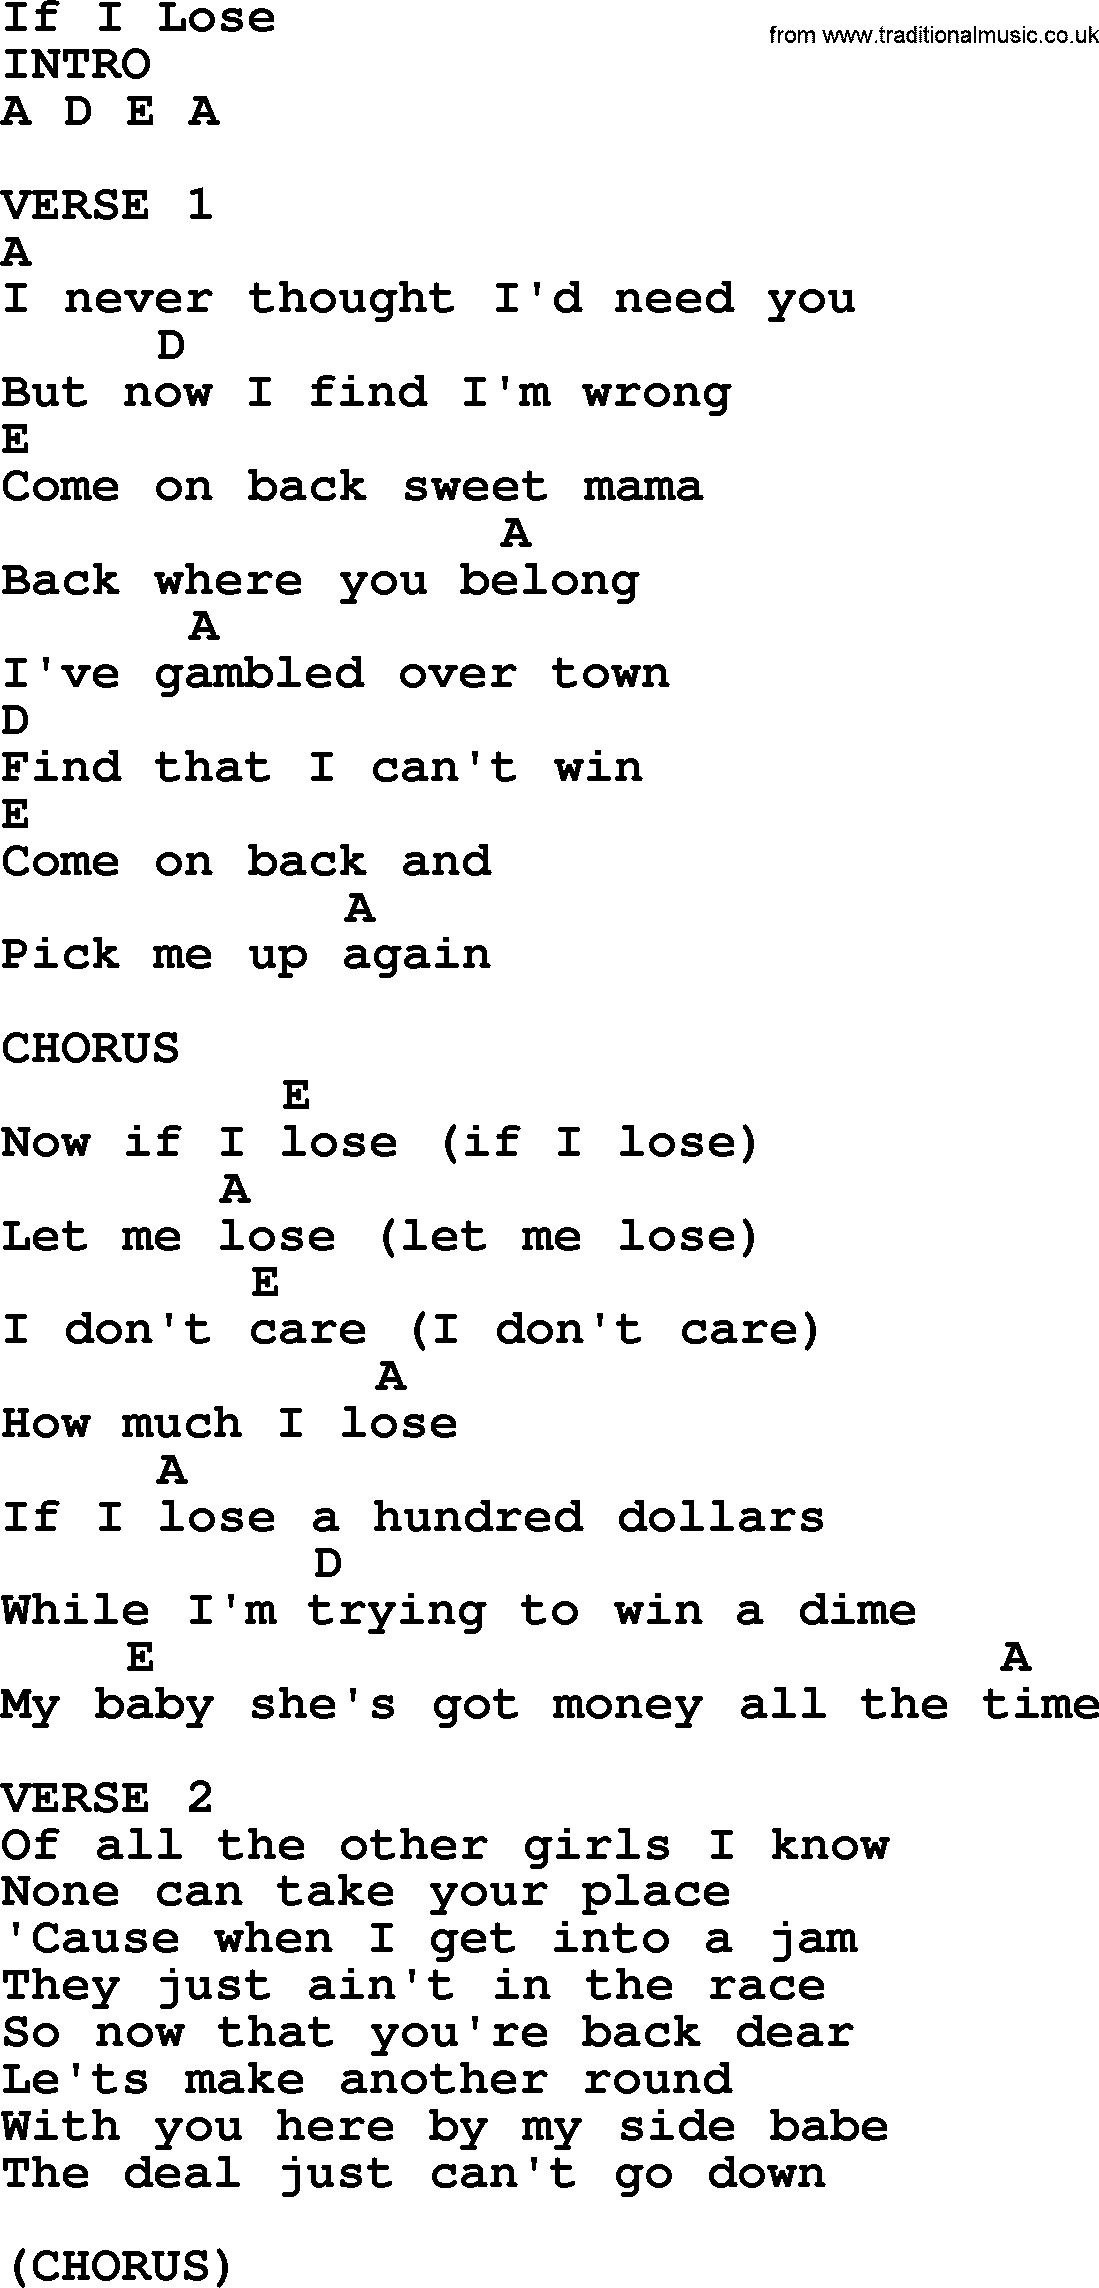 Bluegrass song: If I Lose, lyrics and chords